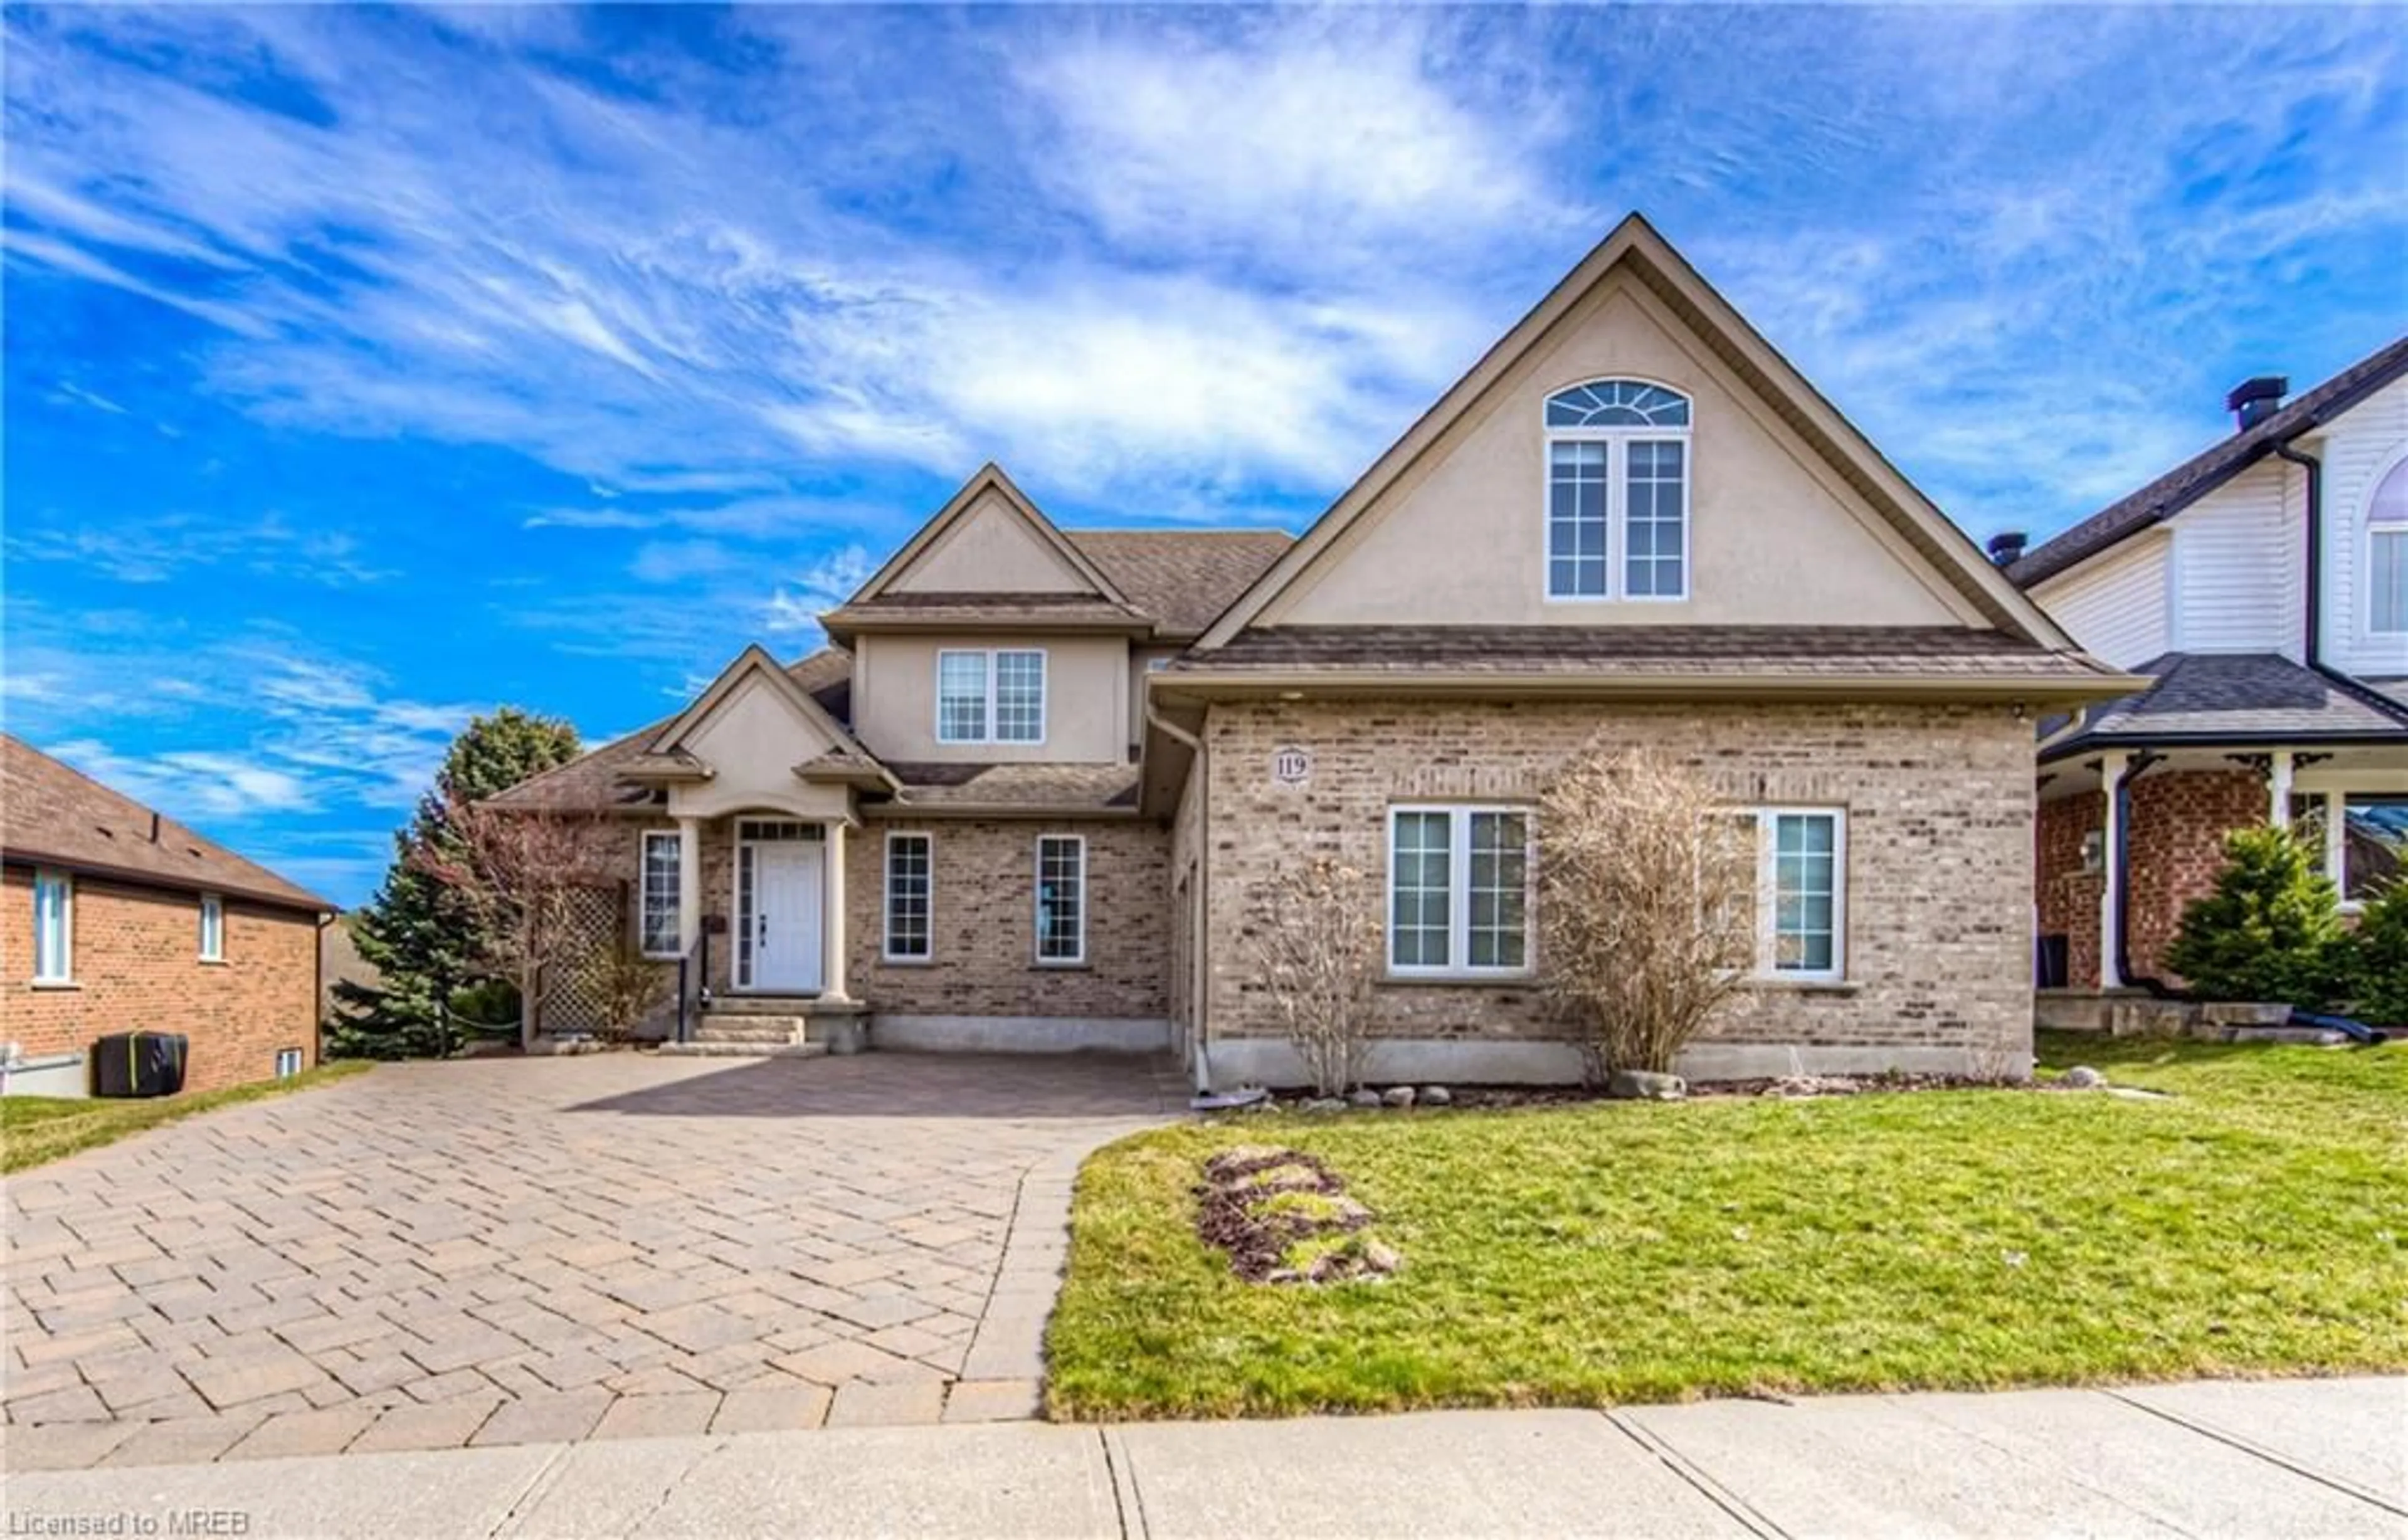 Home with brick exterior material for 119 Chandos Dr, Kitchener Ontario N2A 3Z5